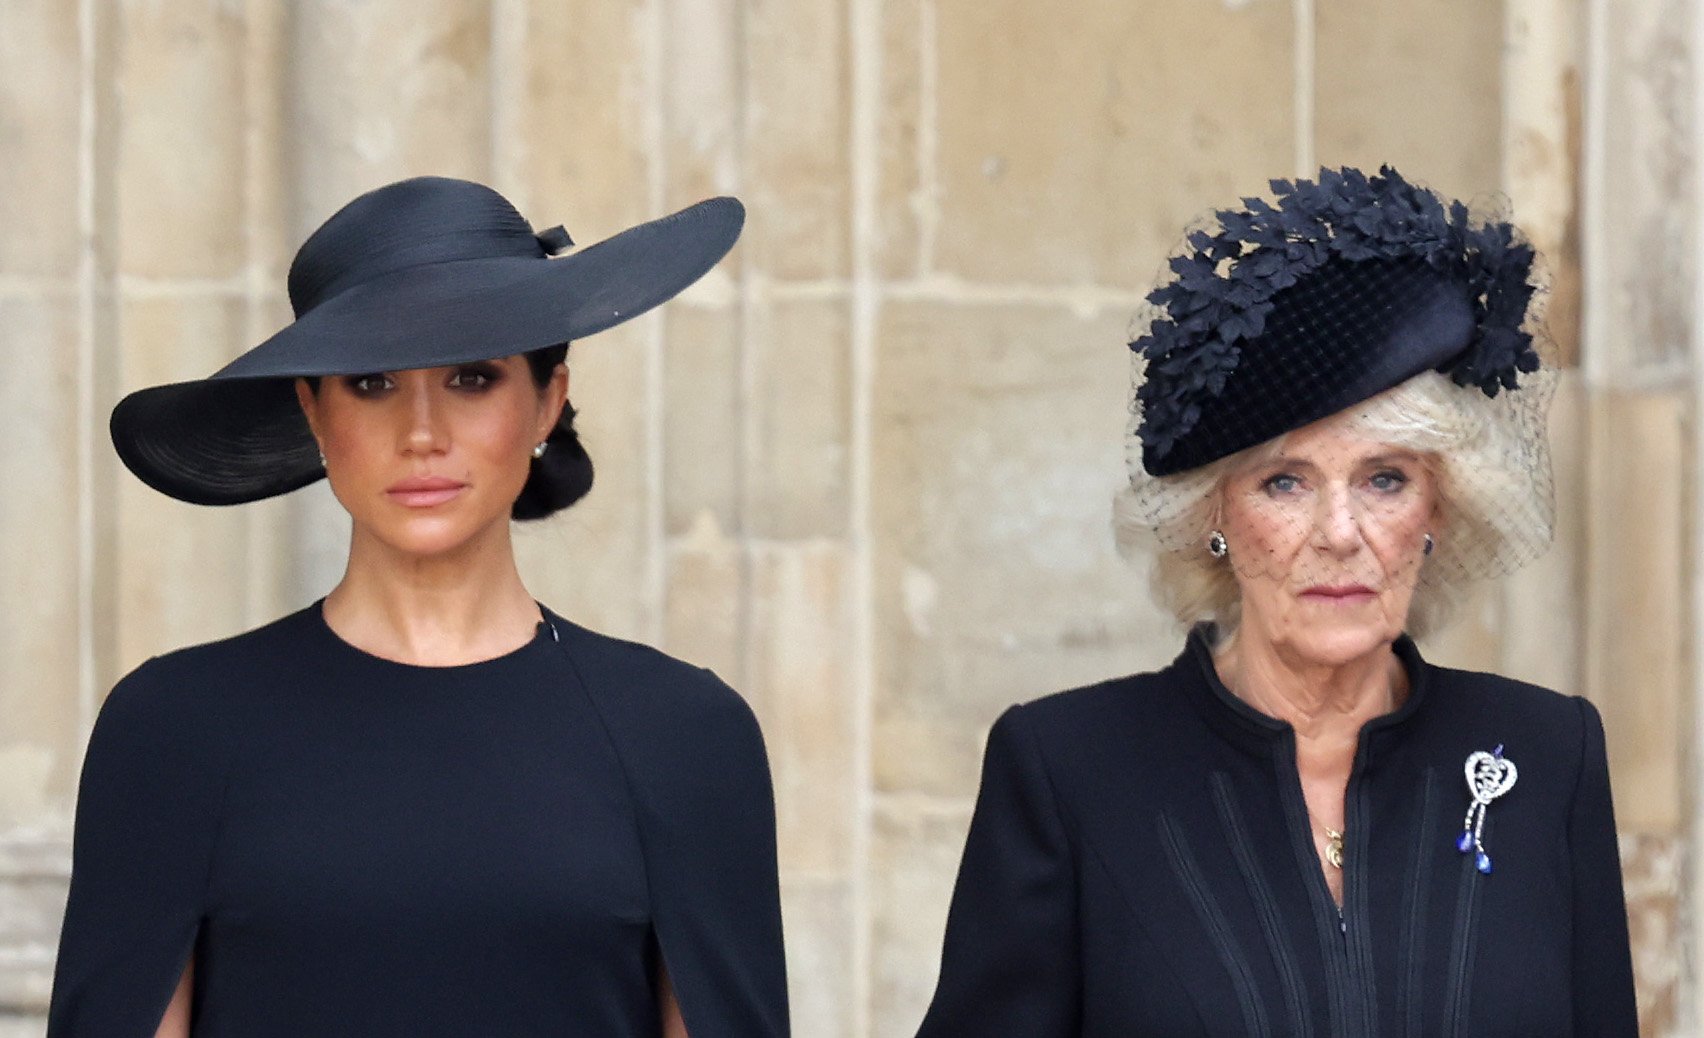 Meghan, Duchess of Sussex and Camilla, Queen Consort are seen during The State Funeral Of Queen Elizabeth II at Westminster Abbey on September 19, 2022 in London, England | Source: Getty Images